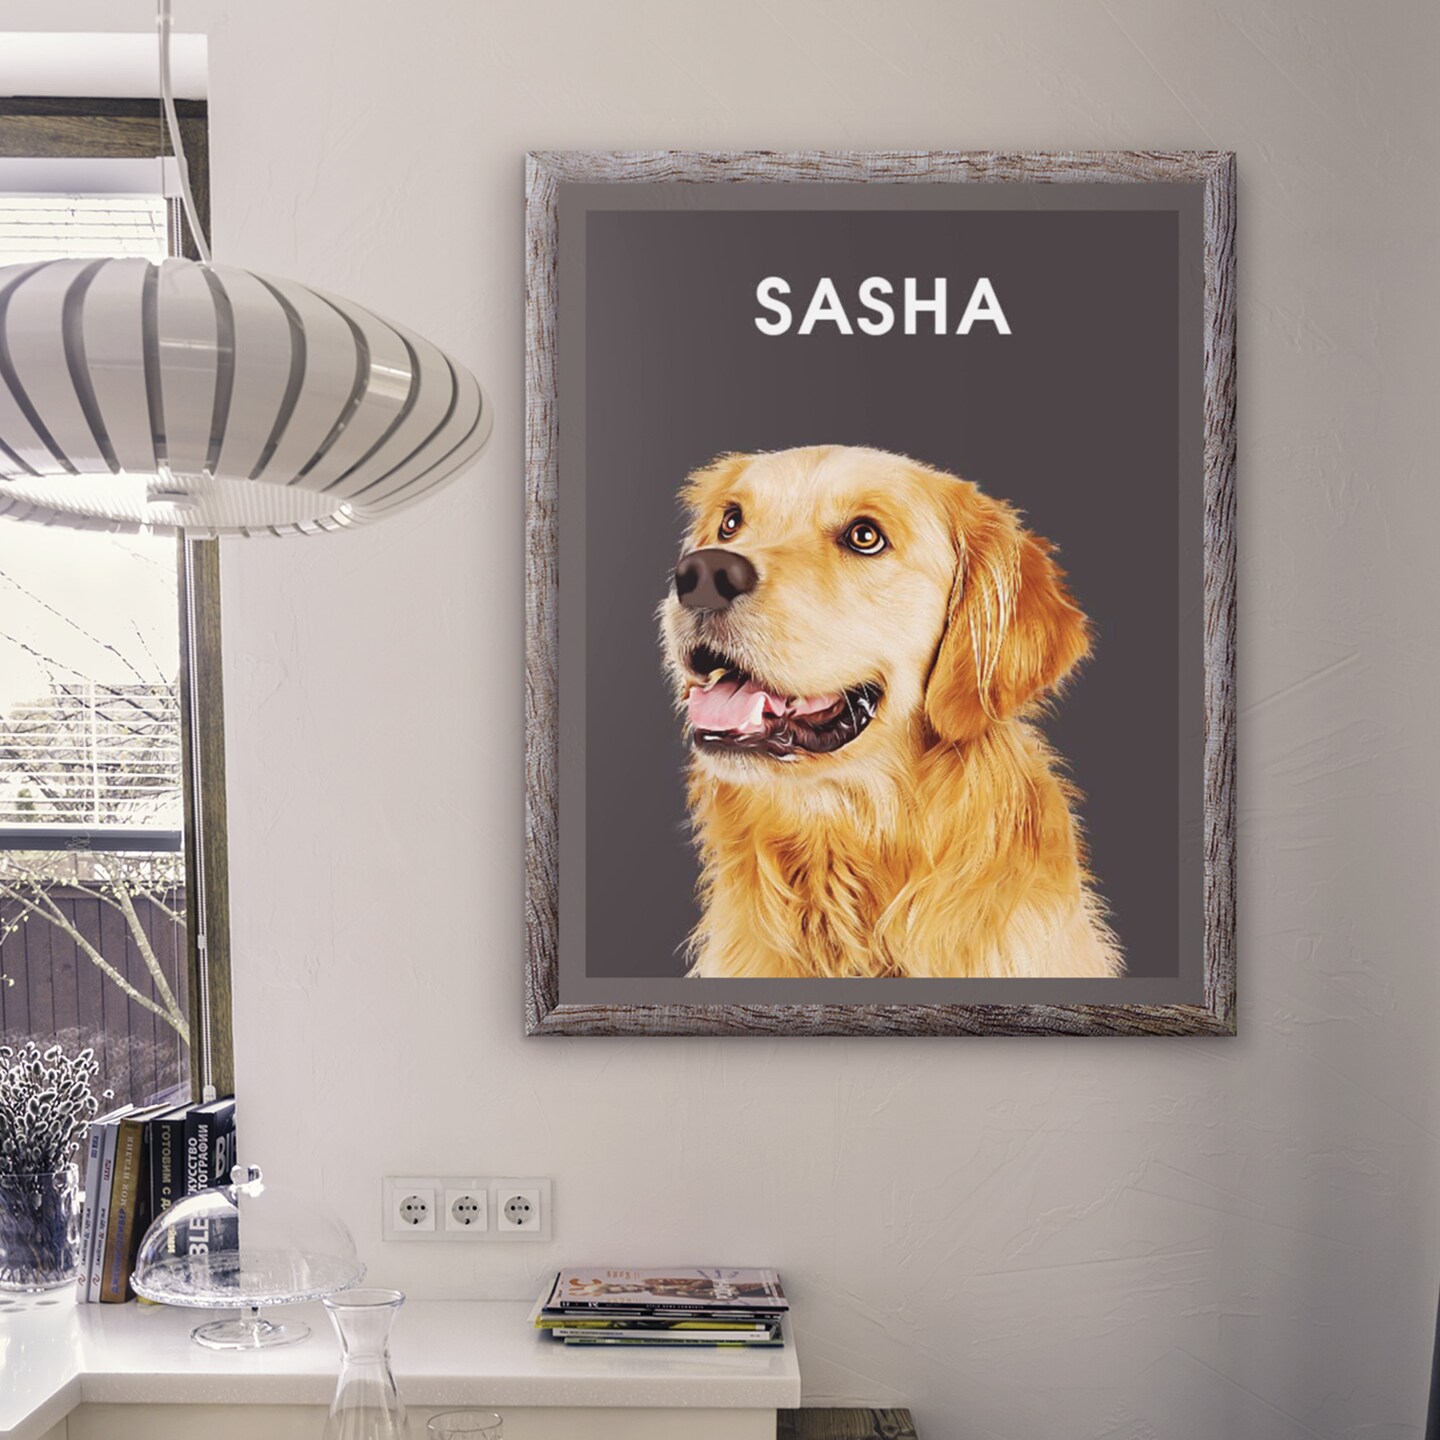 Custom pet portraits create meaningful gifts for friends, family